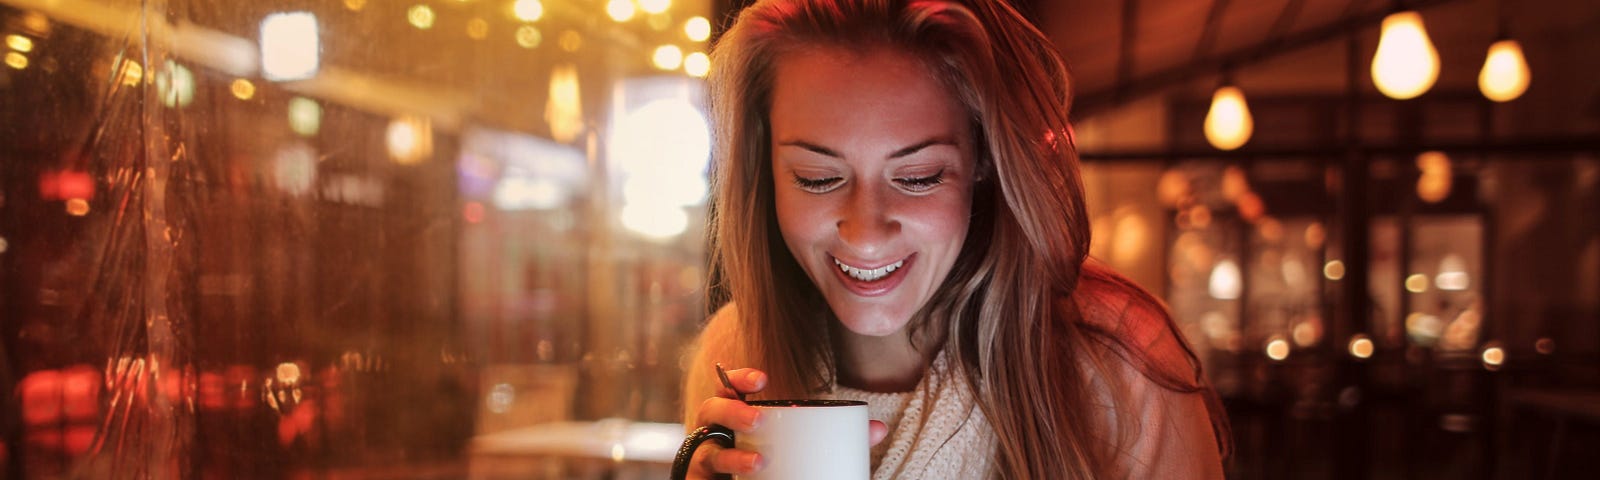 A smiling woman in a coffee shop